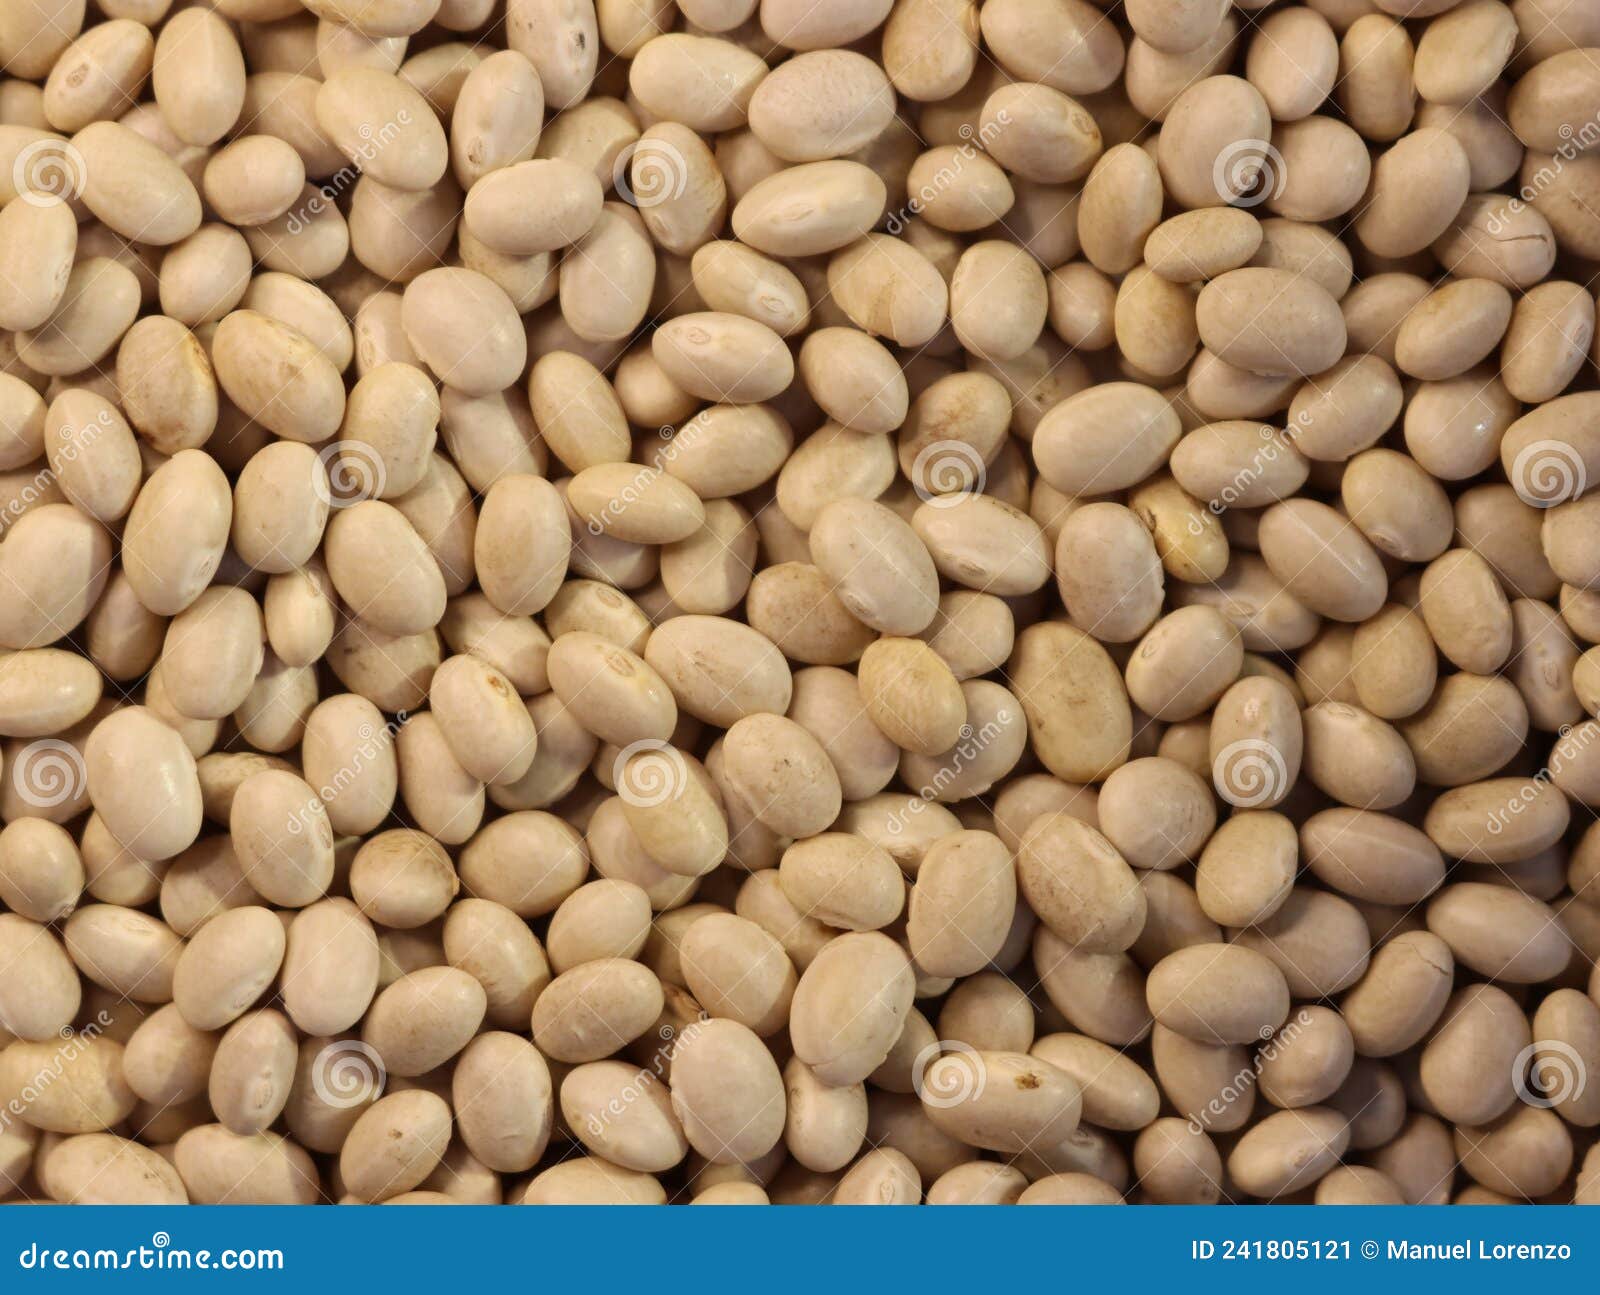 delicious beans beans healthy natural legumes needed background